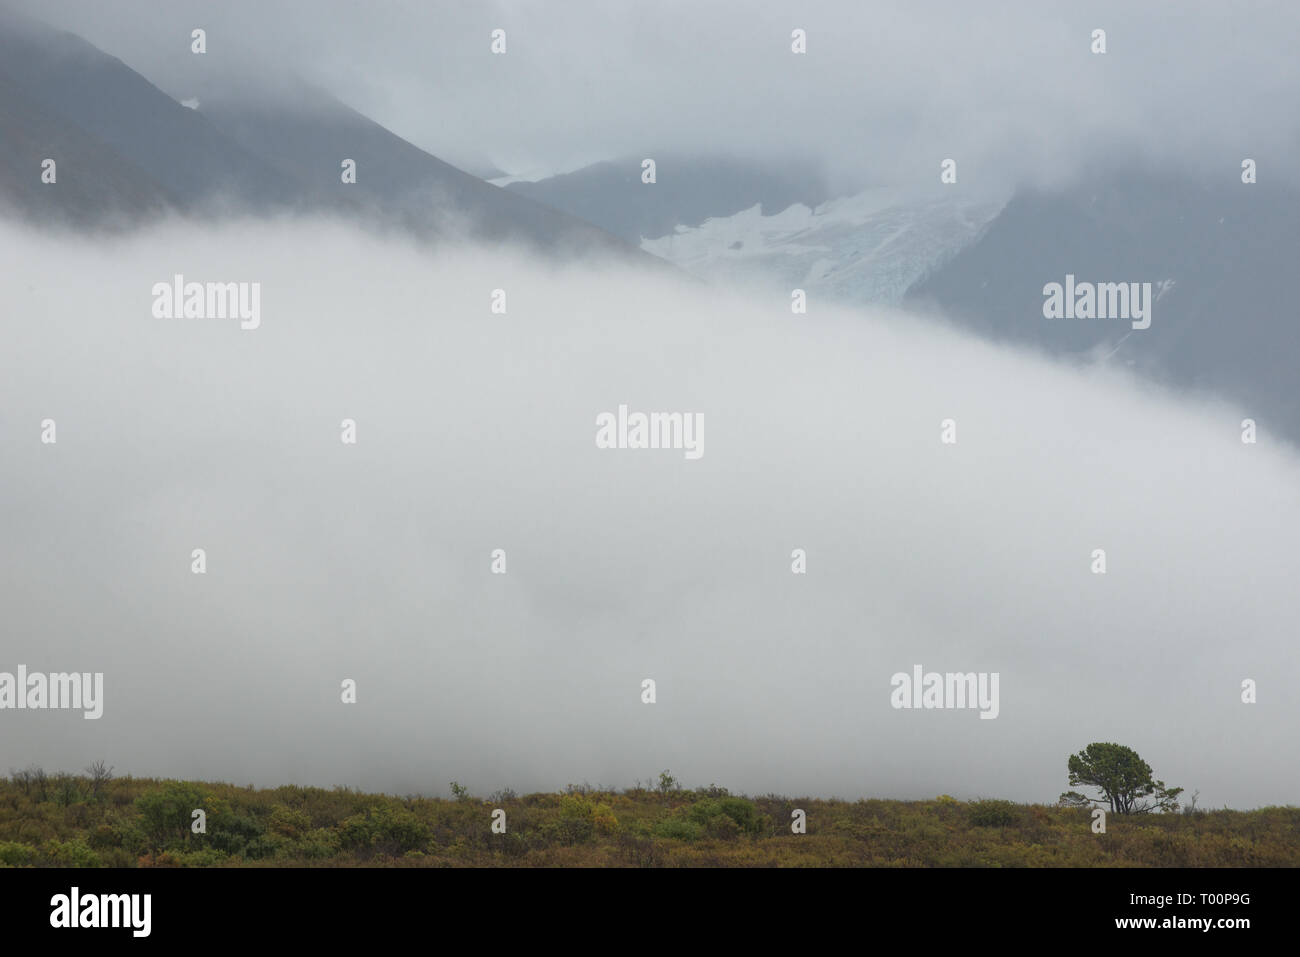 Lone tree in the clouds, Haines Road, northern British Columbia, Canada Stock Photo